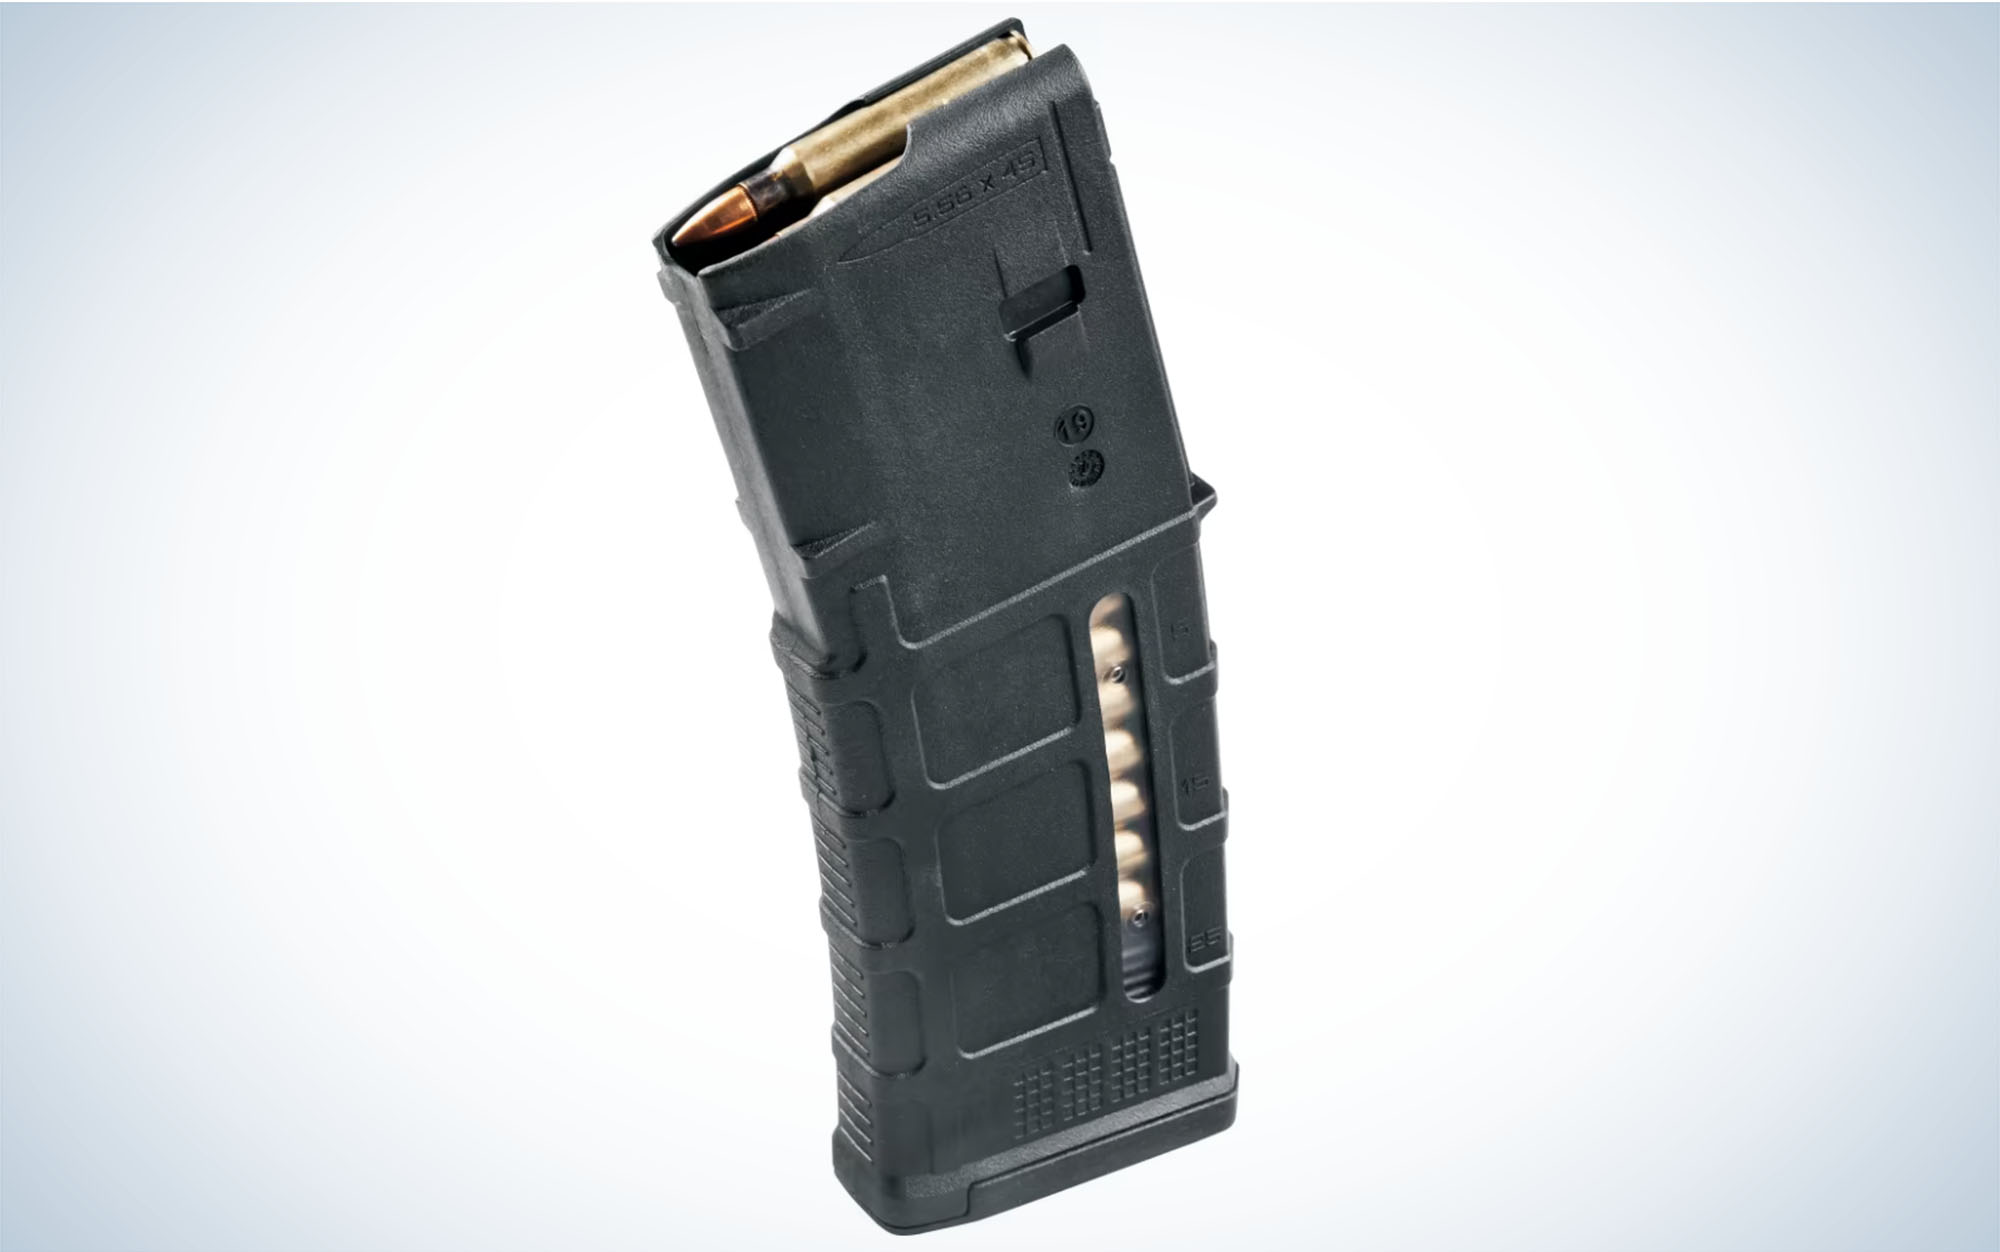 The Magpul PMAG 30 AR/M4 GEN M3 Window is one of the best AR mags.